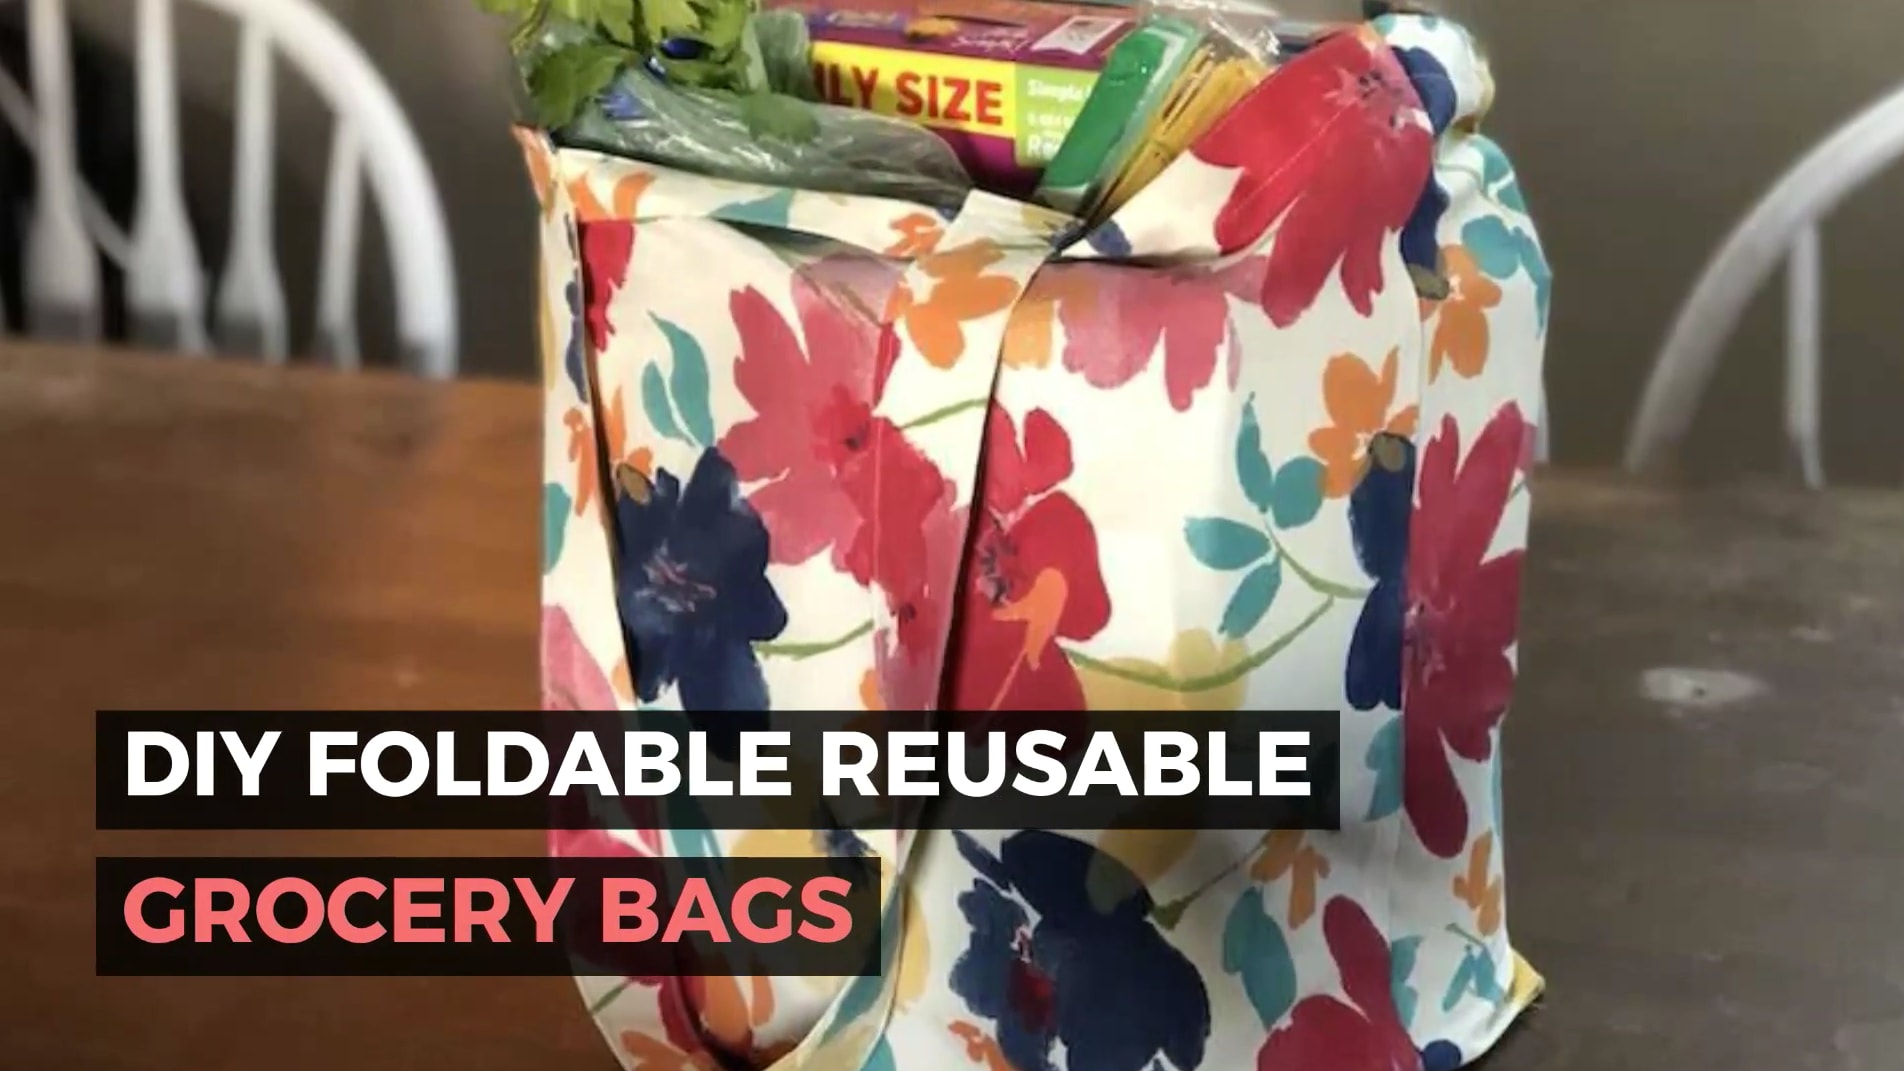 8 Reasons You Should Use Reusable Grocery Bags - Tote Bag Factory